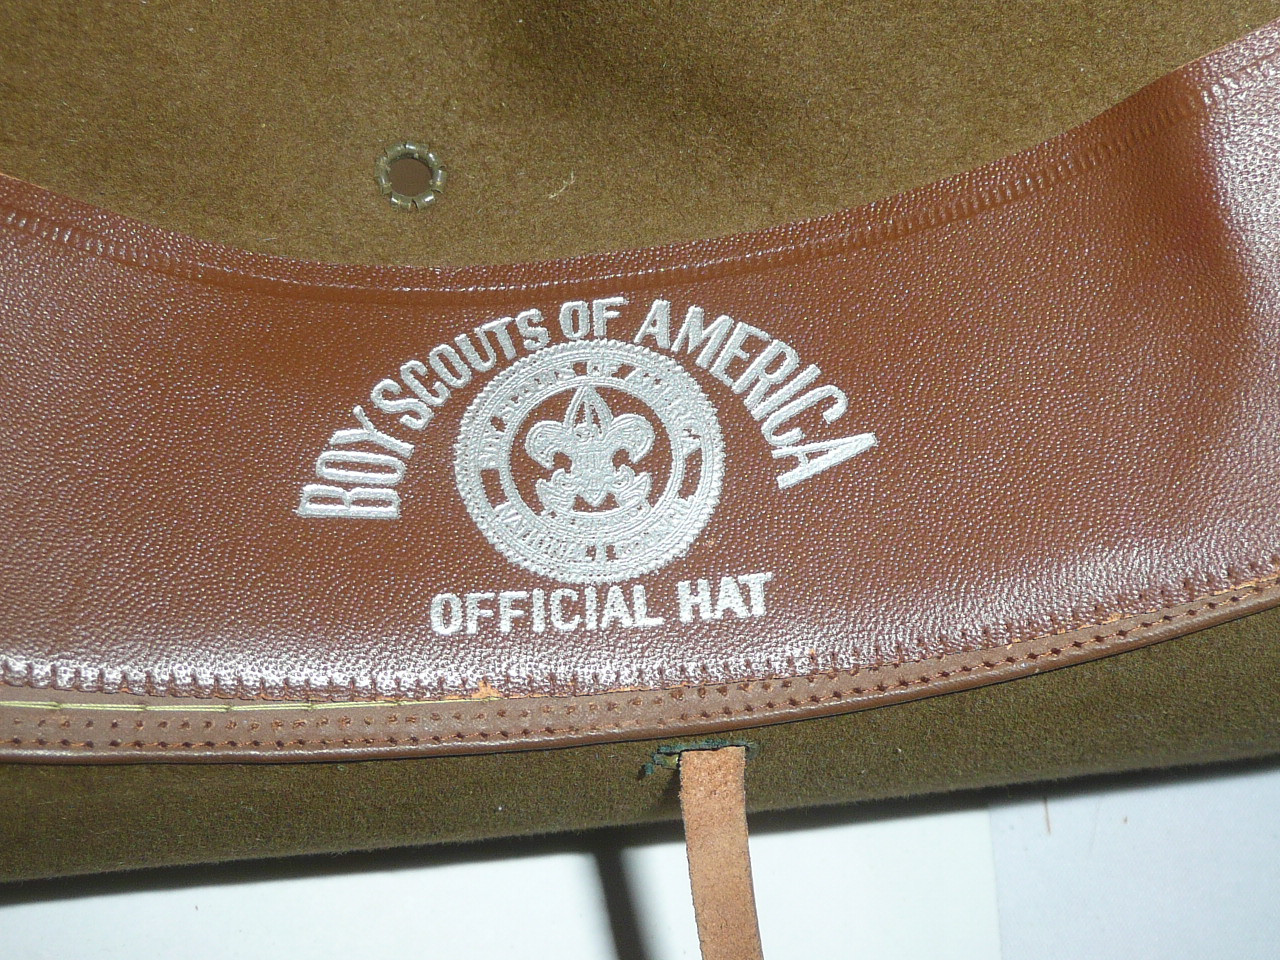 Official Boy Scout "Scout Master"Campaign Hat (Smokey the Bear hat), has storage board, Like new but internal leather band is separating from stiching